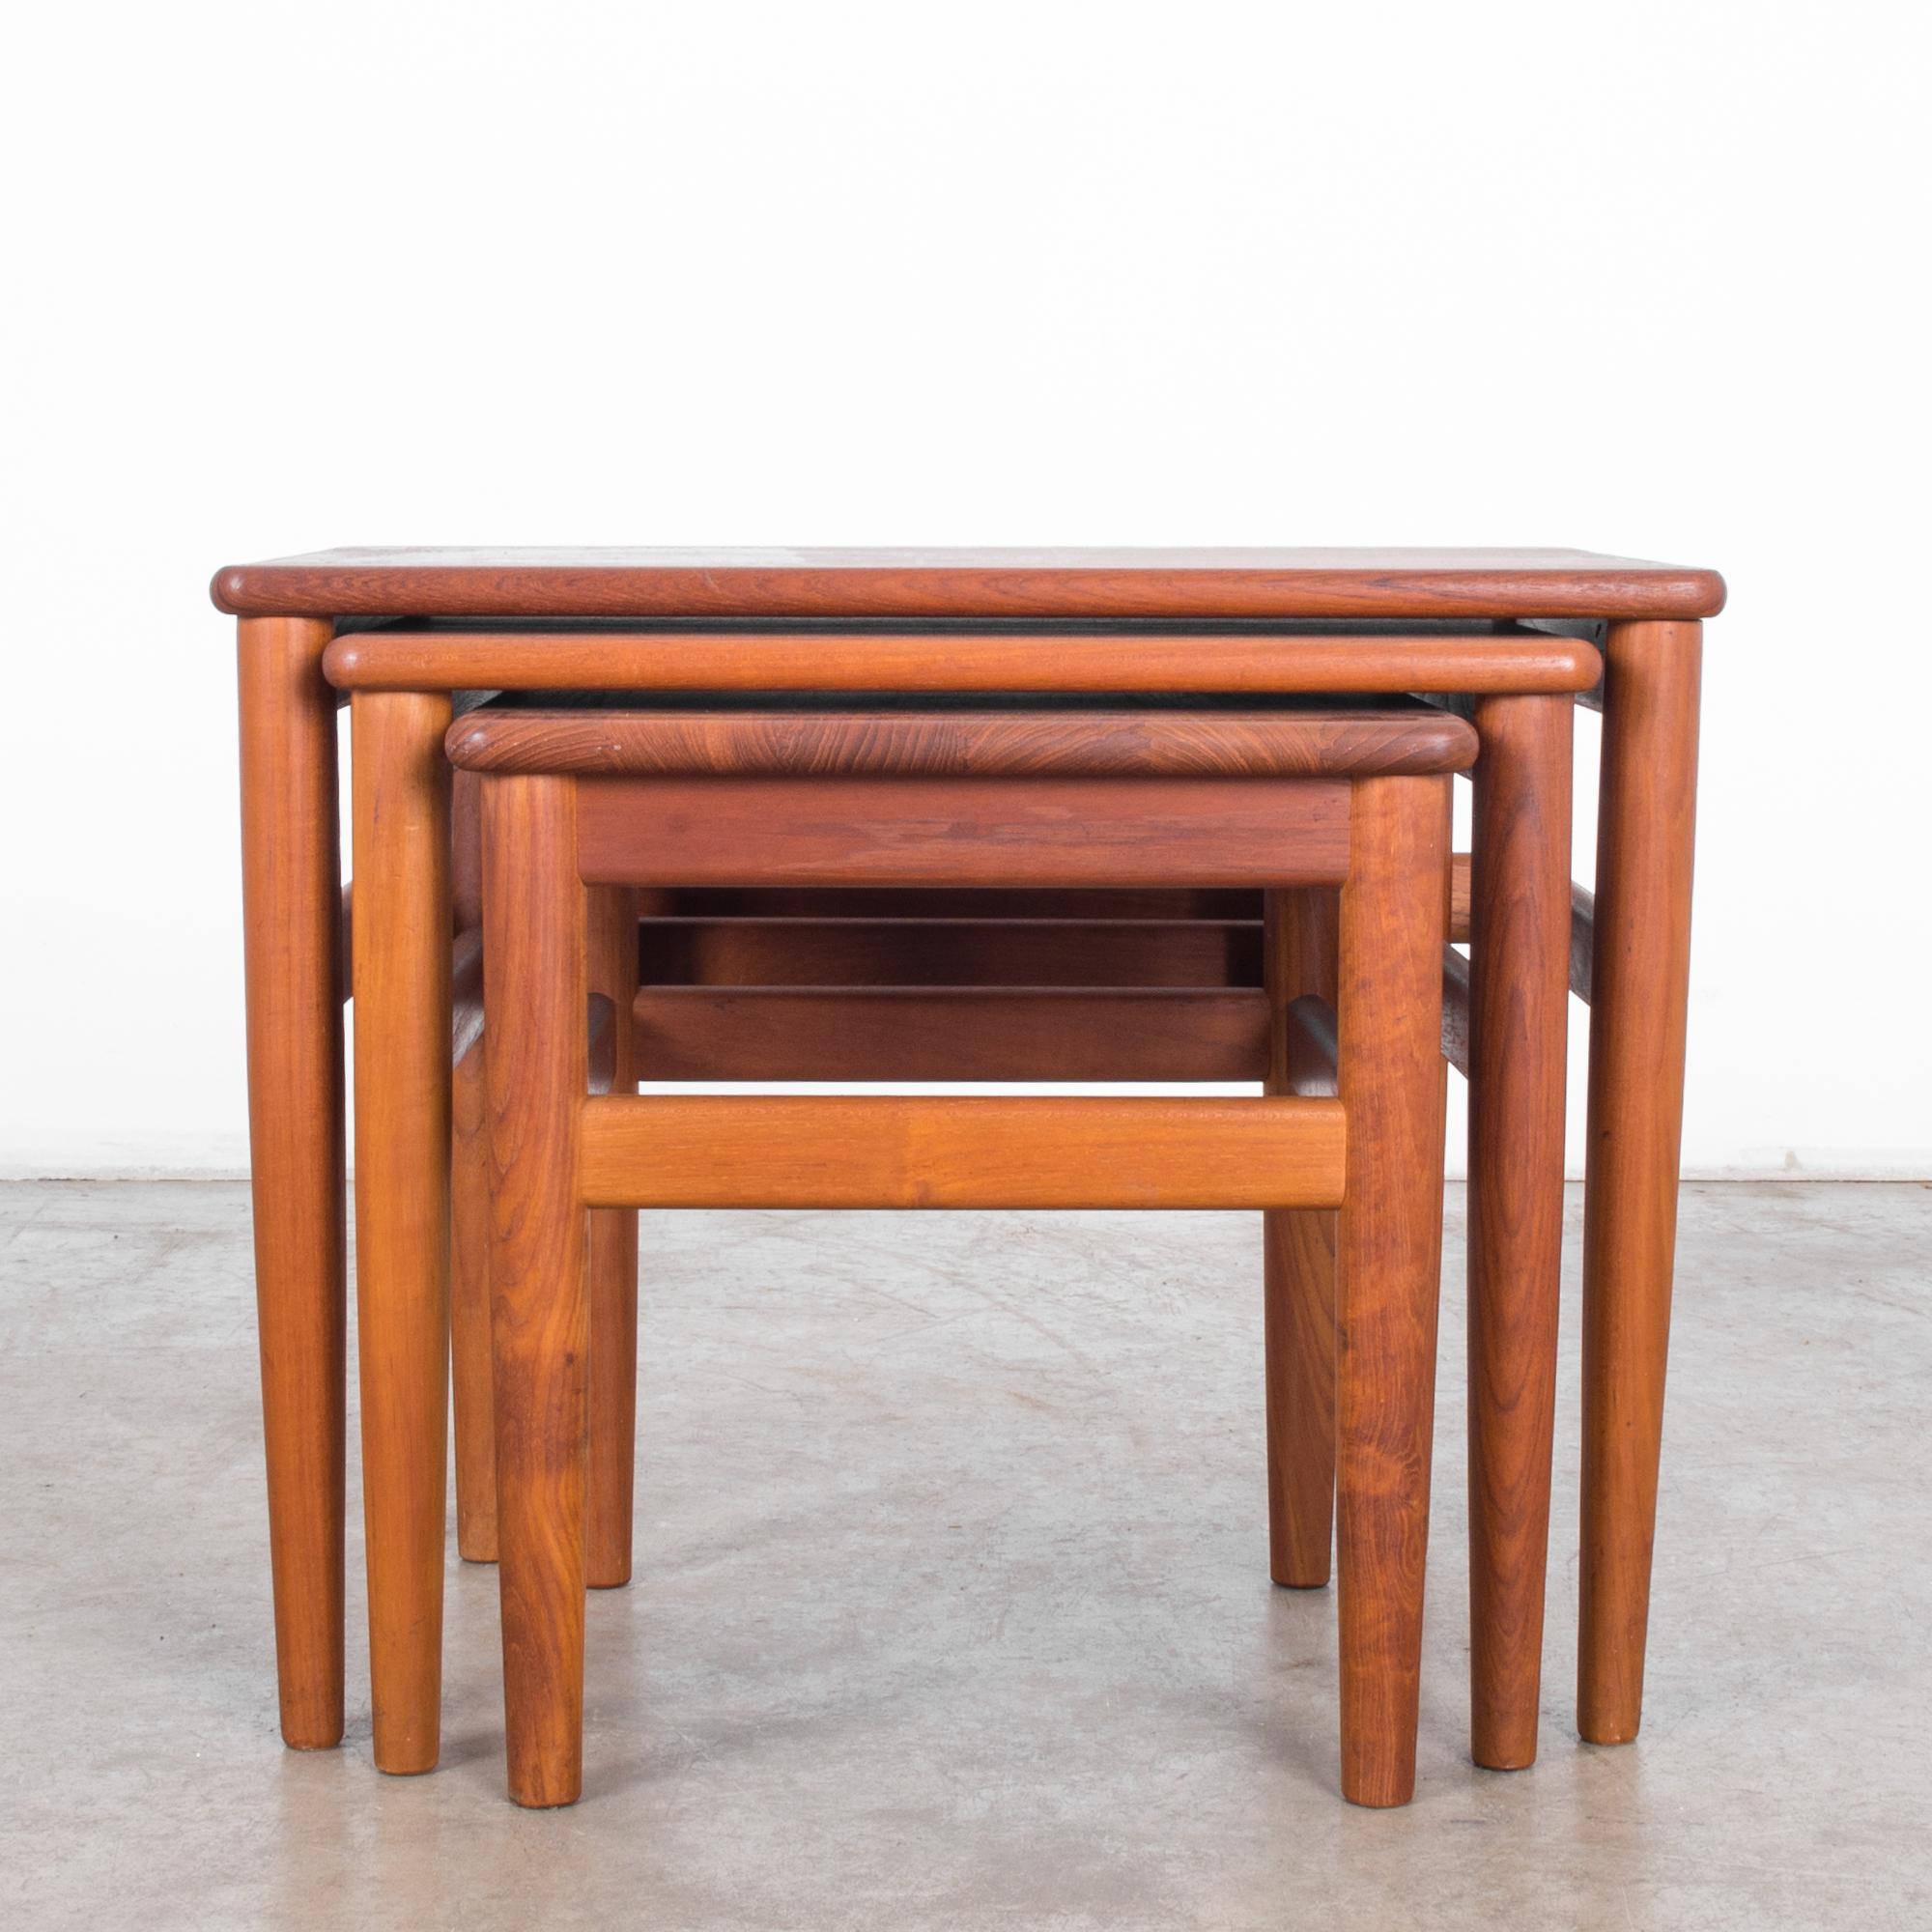 In the innovative design landscape of 1960s Denmark, this set of teak nesting tables epitomizes the sleek sophistication and functional elegance of the era. Crafted with meticulous attention to detail, these tables represent the epitome of Danish